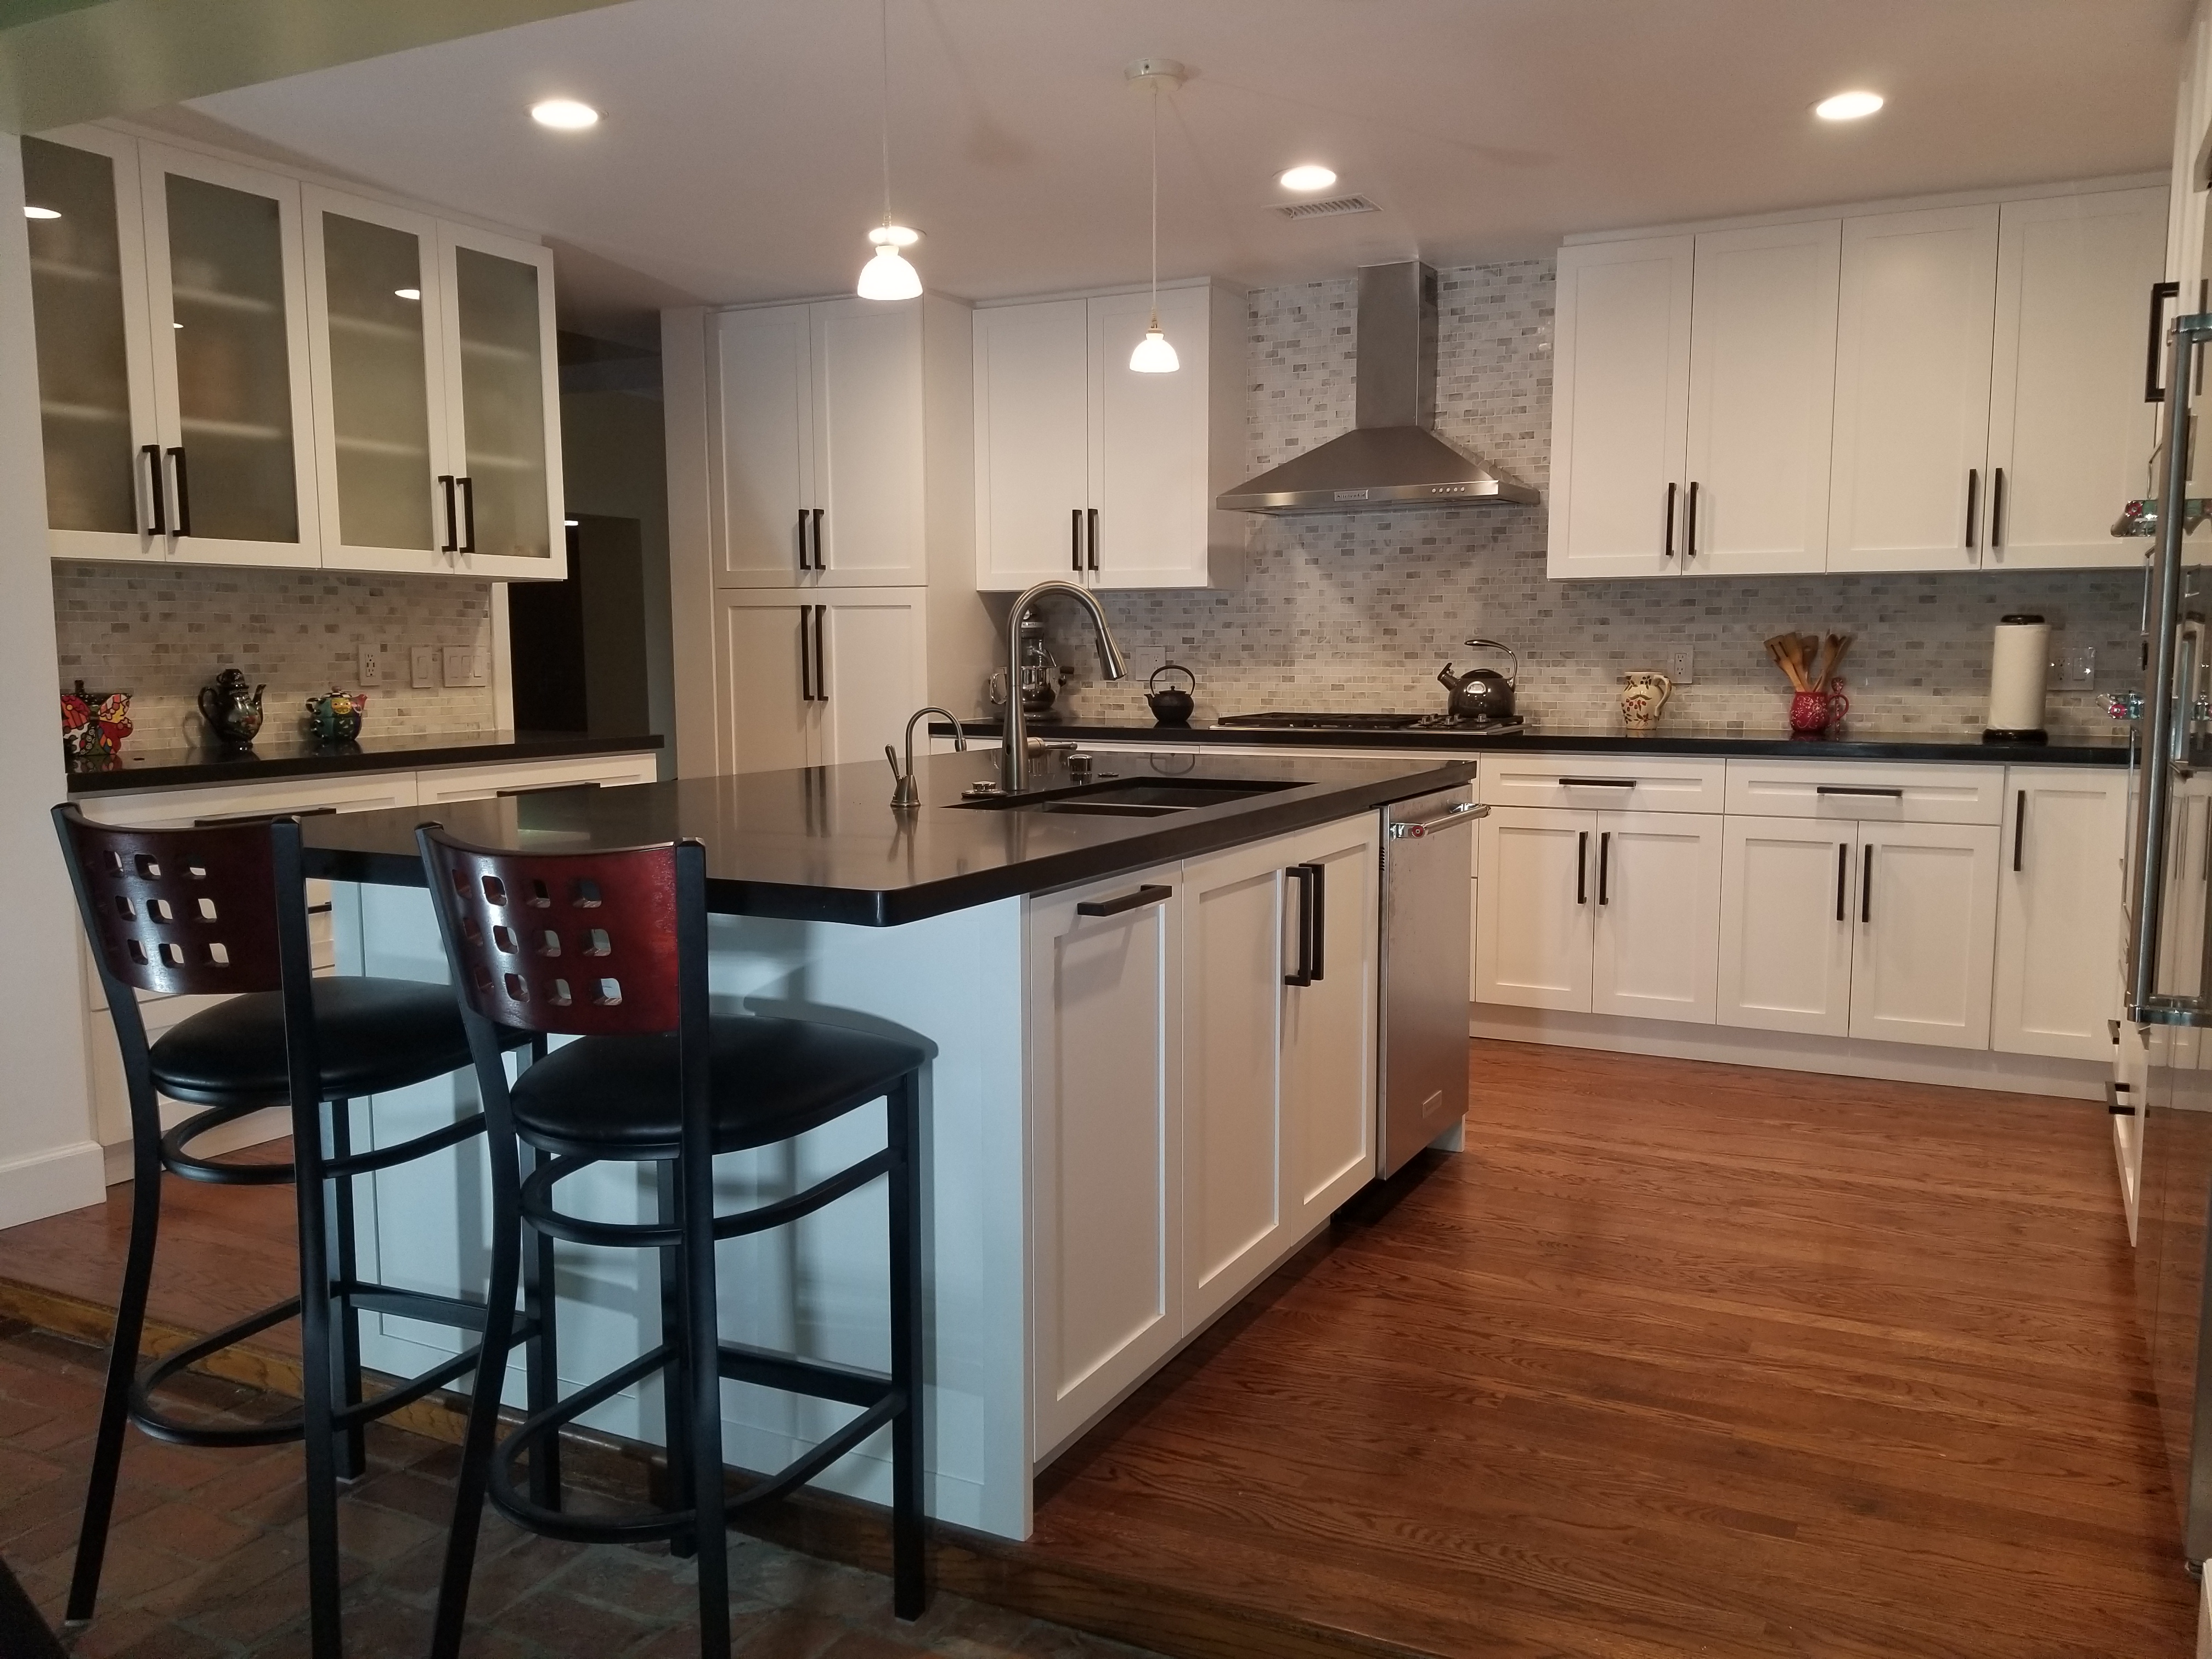 Latest Projects | New Style Kitchen Cabinets corp.